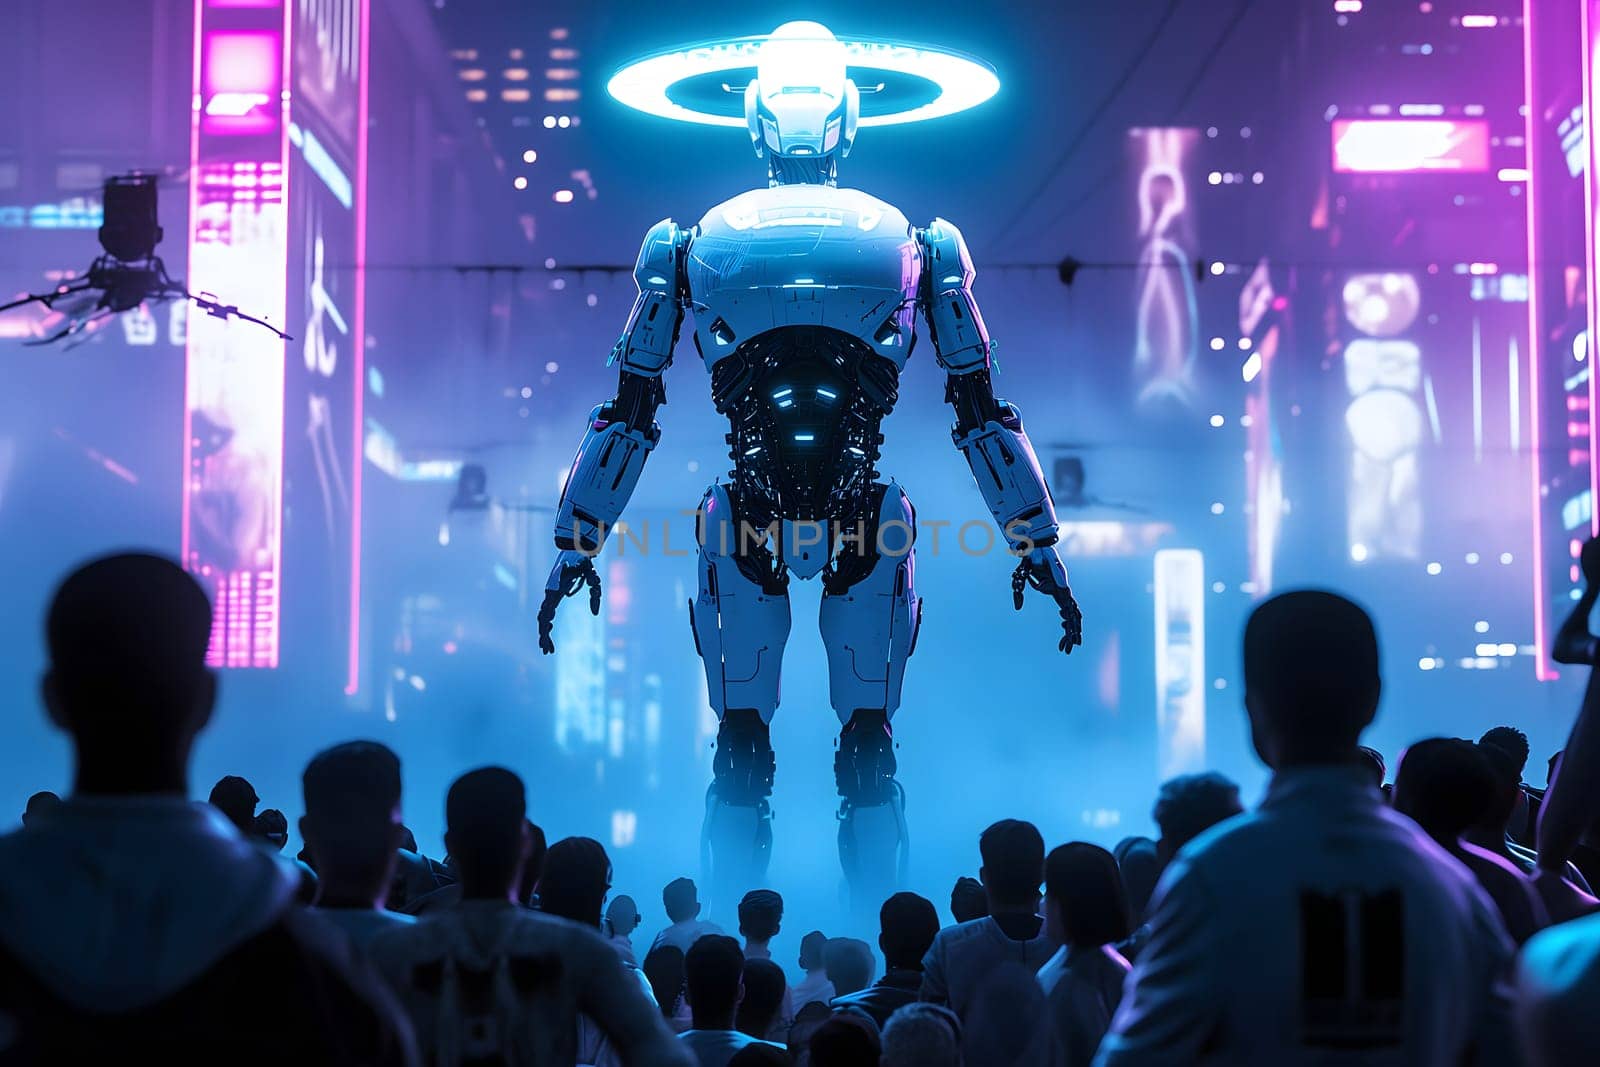 Cyber god in front of their adepts for artificial super intelligence encounter. Neural network generated image. Not based on any actual person or scene.